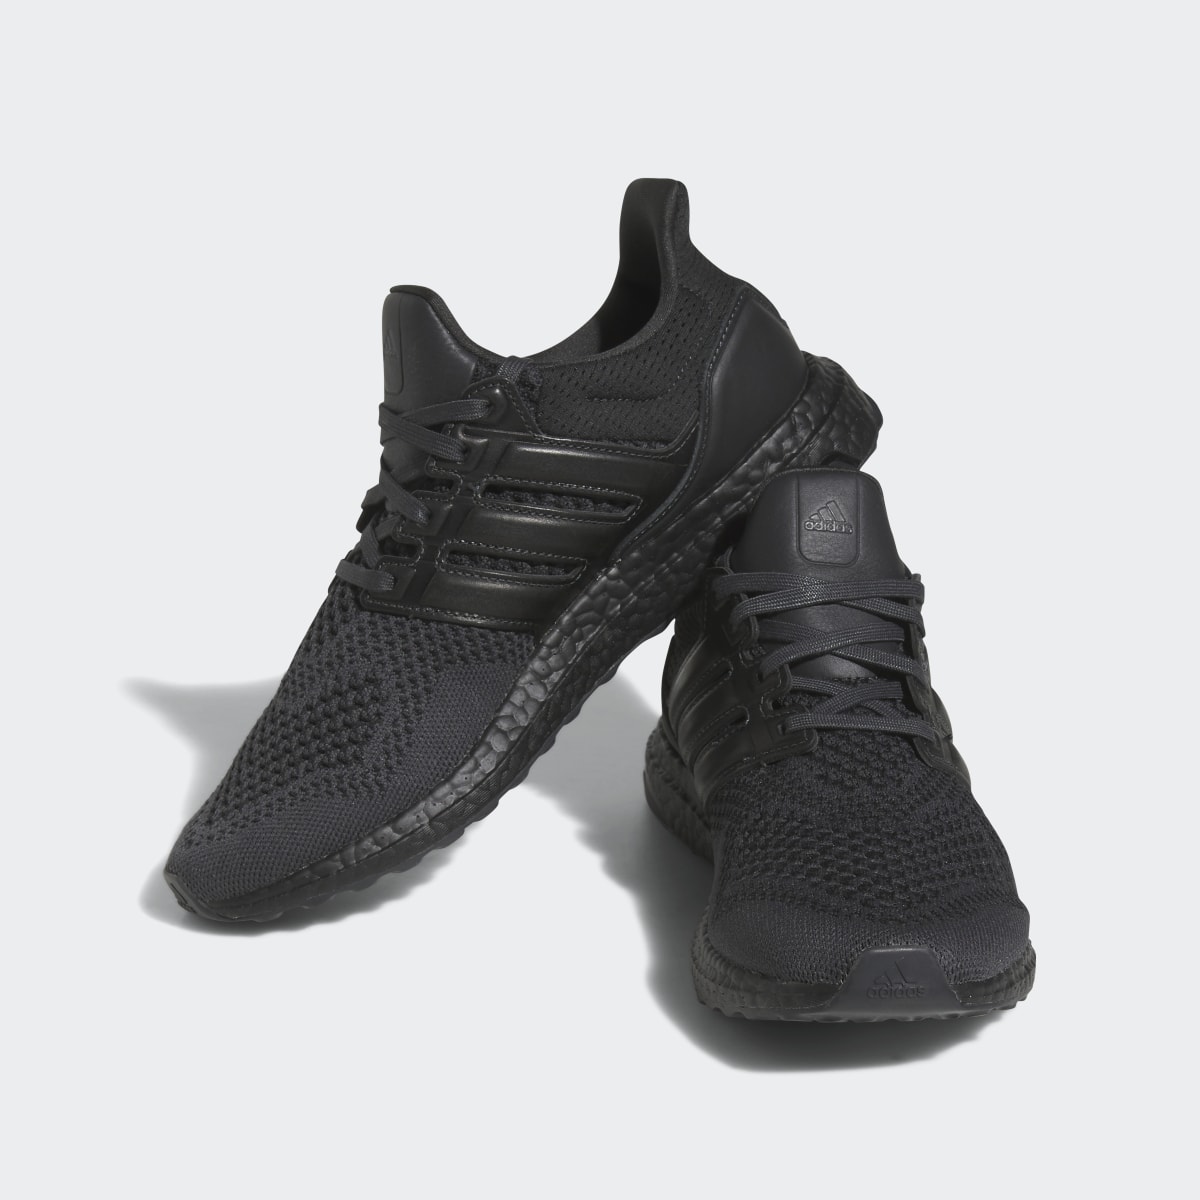 Adidas Ultraboost 1 DNA Shoes. 8